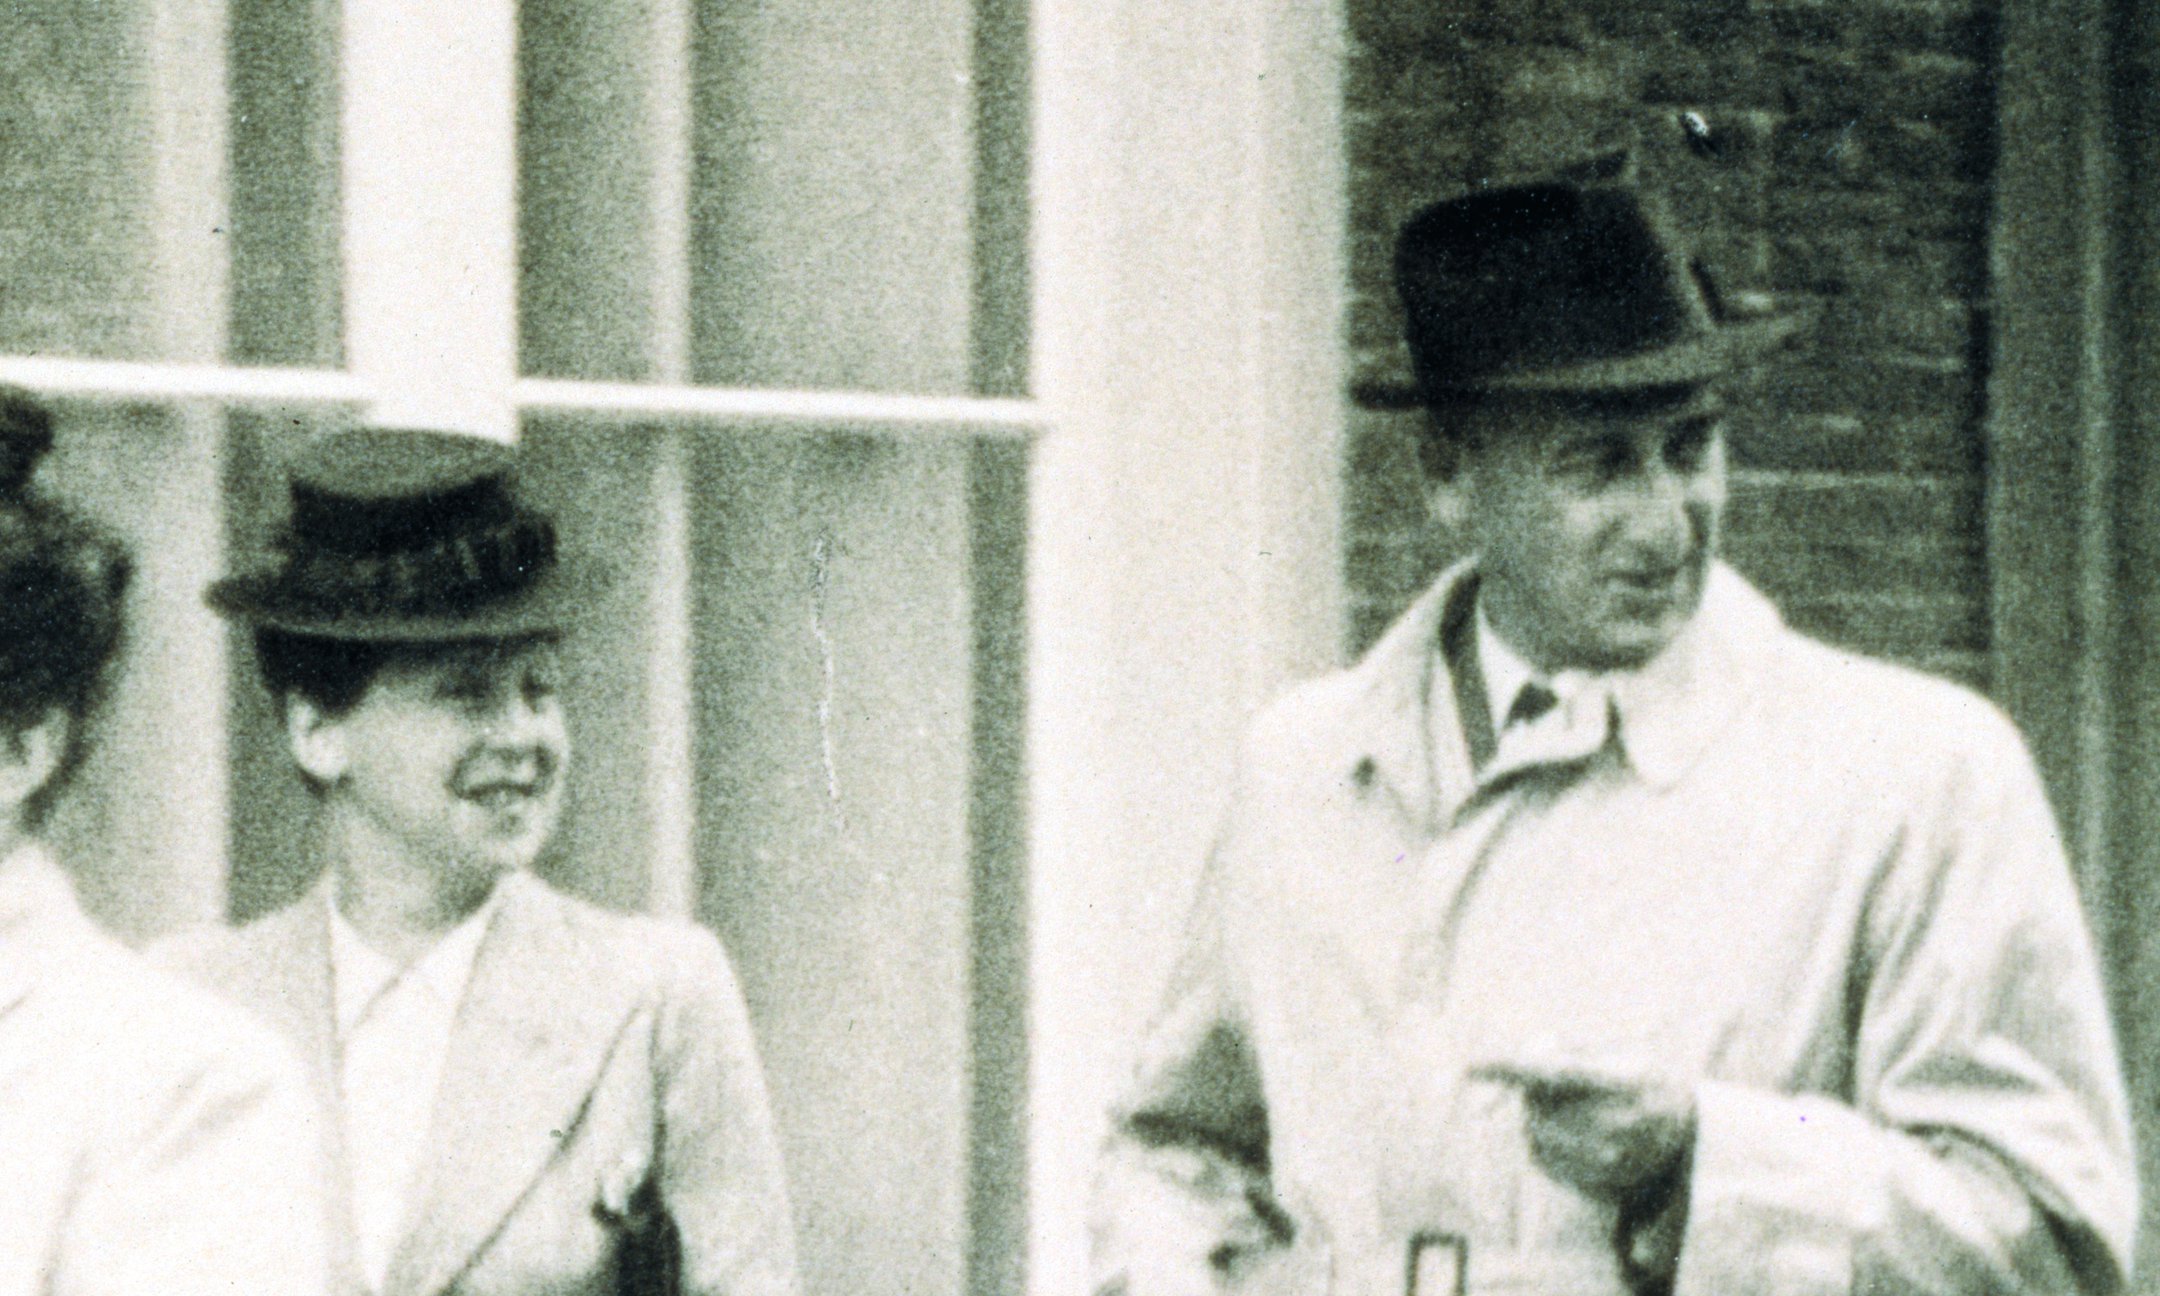 Hermann and Auguste van Pels (left) on their way to the wedding of Miep Santrouschitz and Jan Gies, 16 July 1941.